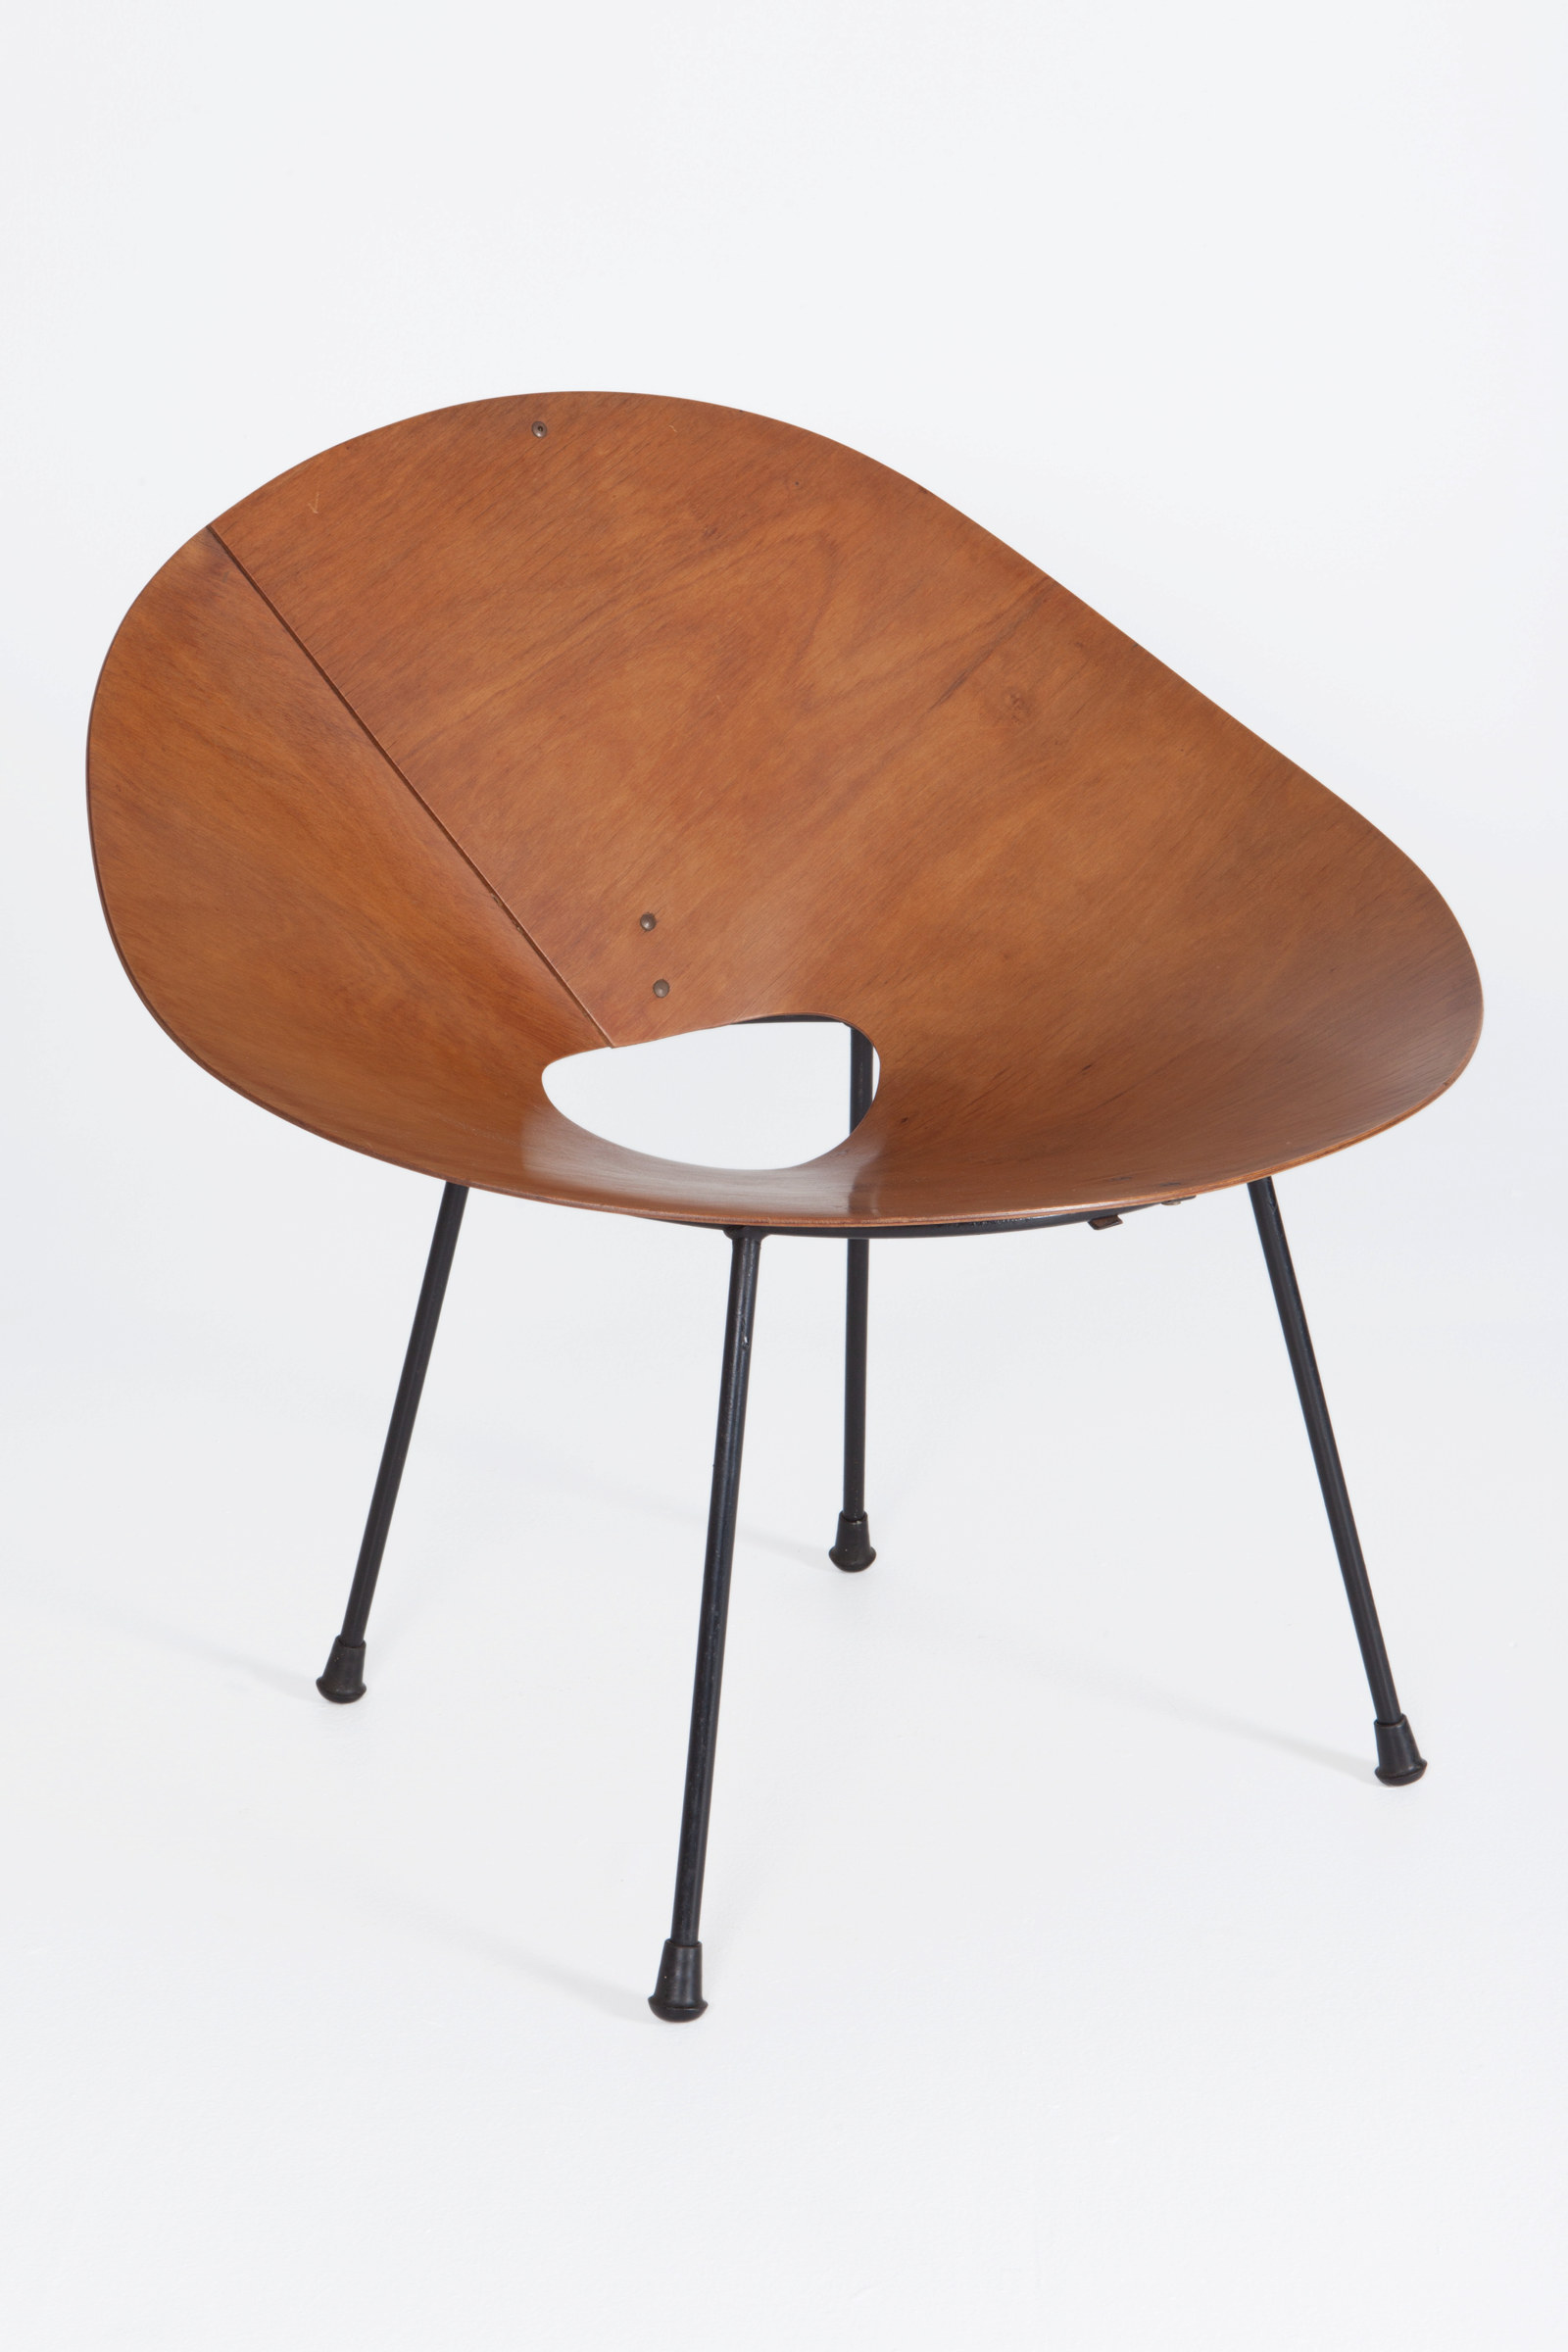 Kone chair, Design by Roger McLay, Sydney, late 1940s